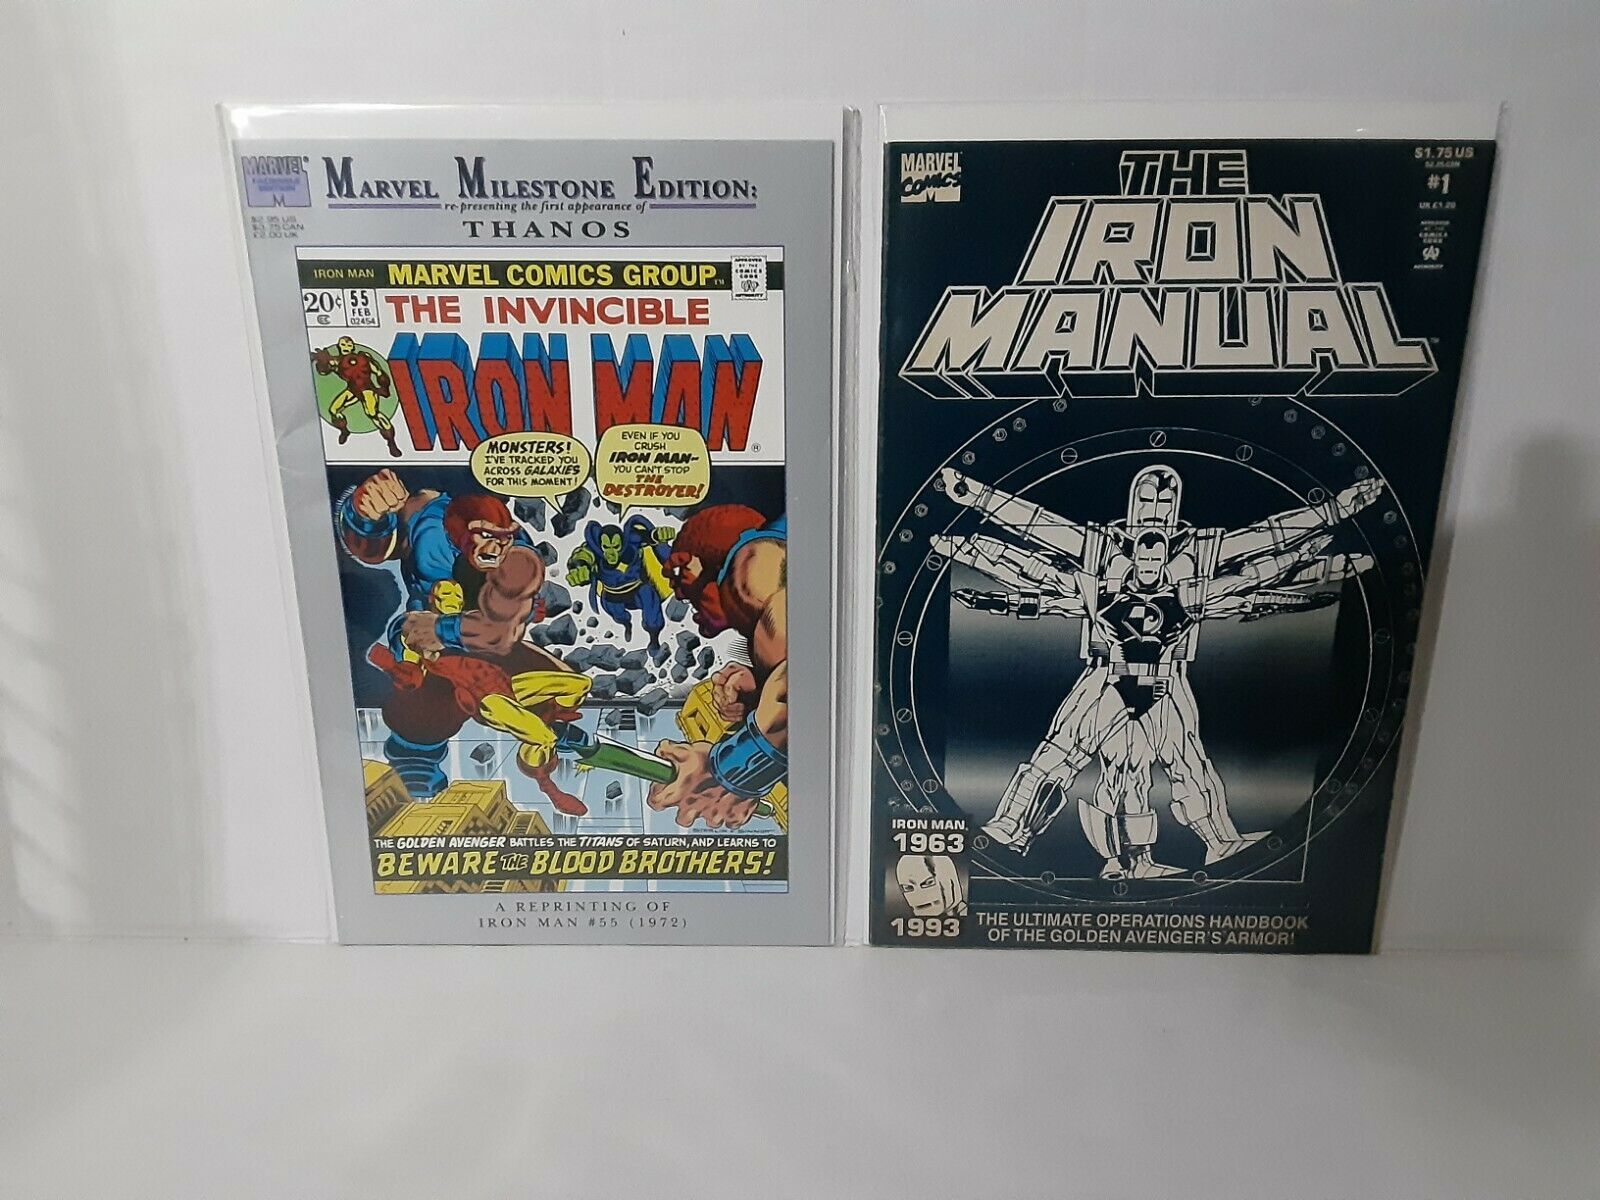 Primary image for IRON MAN: #55 FIRST THANOS + #1, SPIDER-MAN , #600, IRON MANUAL - FREE SHIPPING